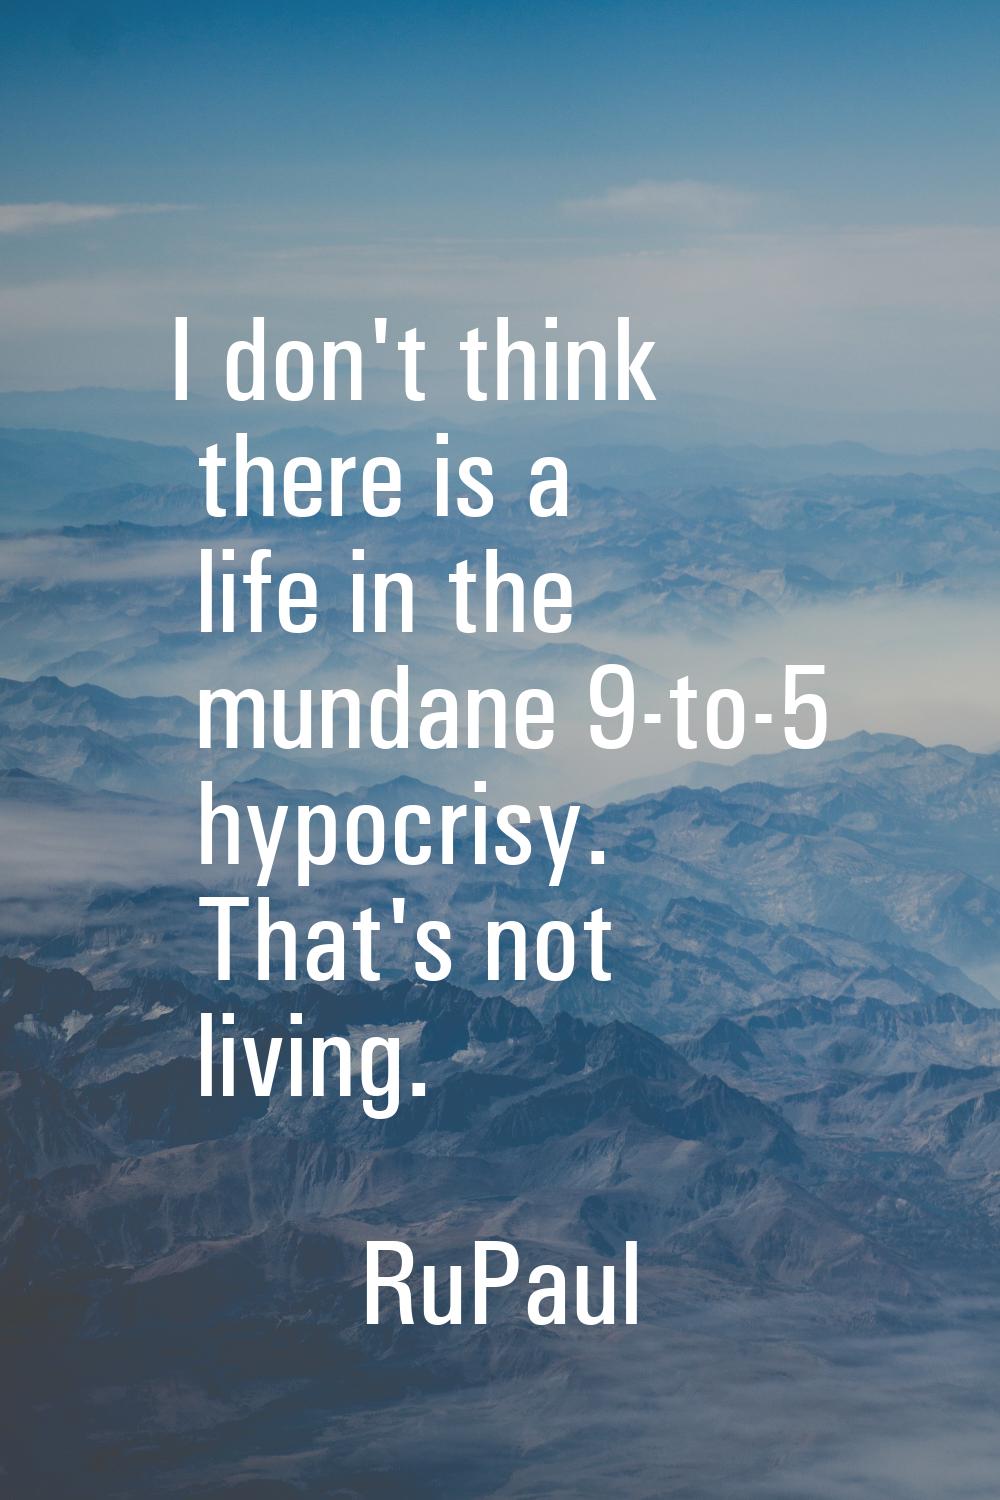 I don't think there is a life in the mundane 9-to-5 hypocrisy. That's not living.